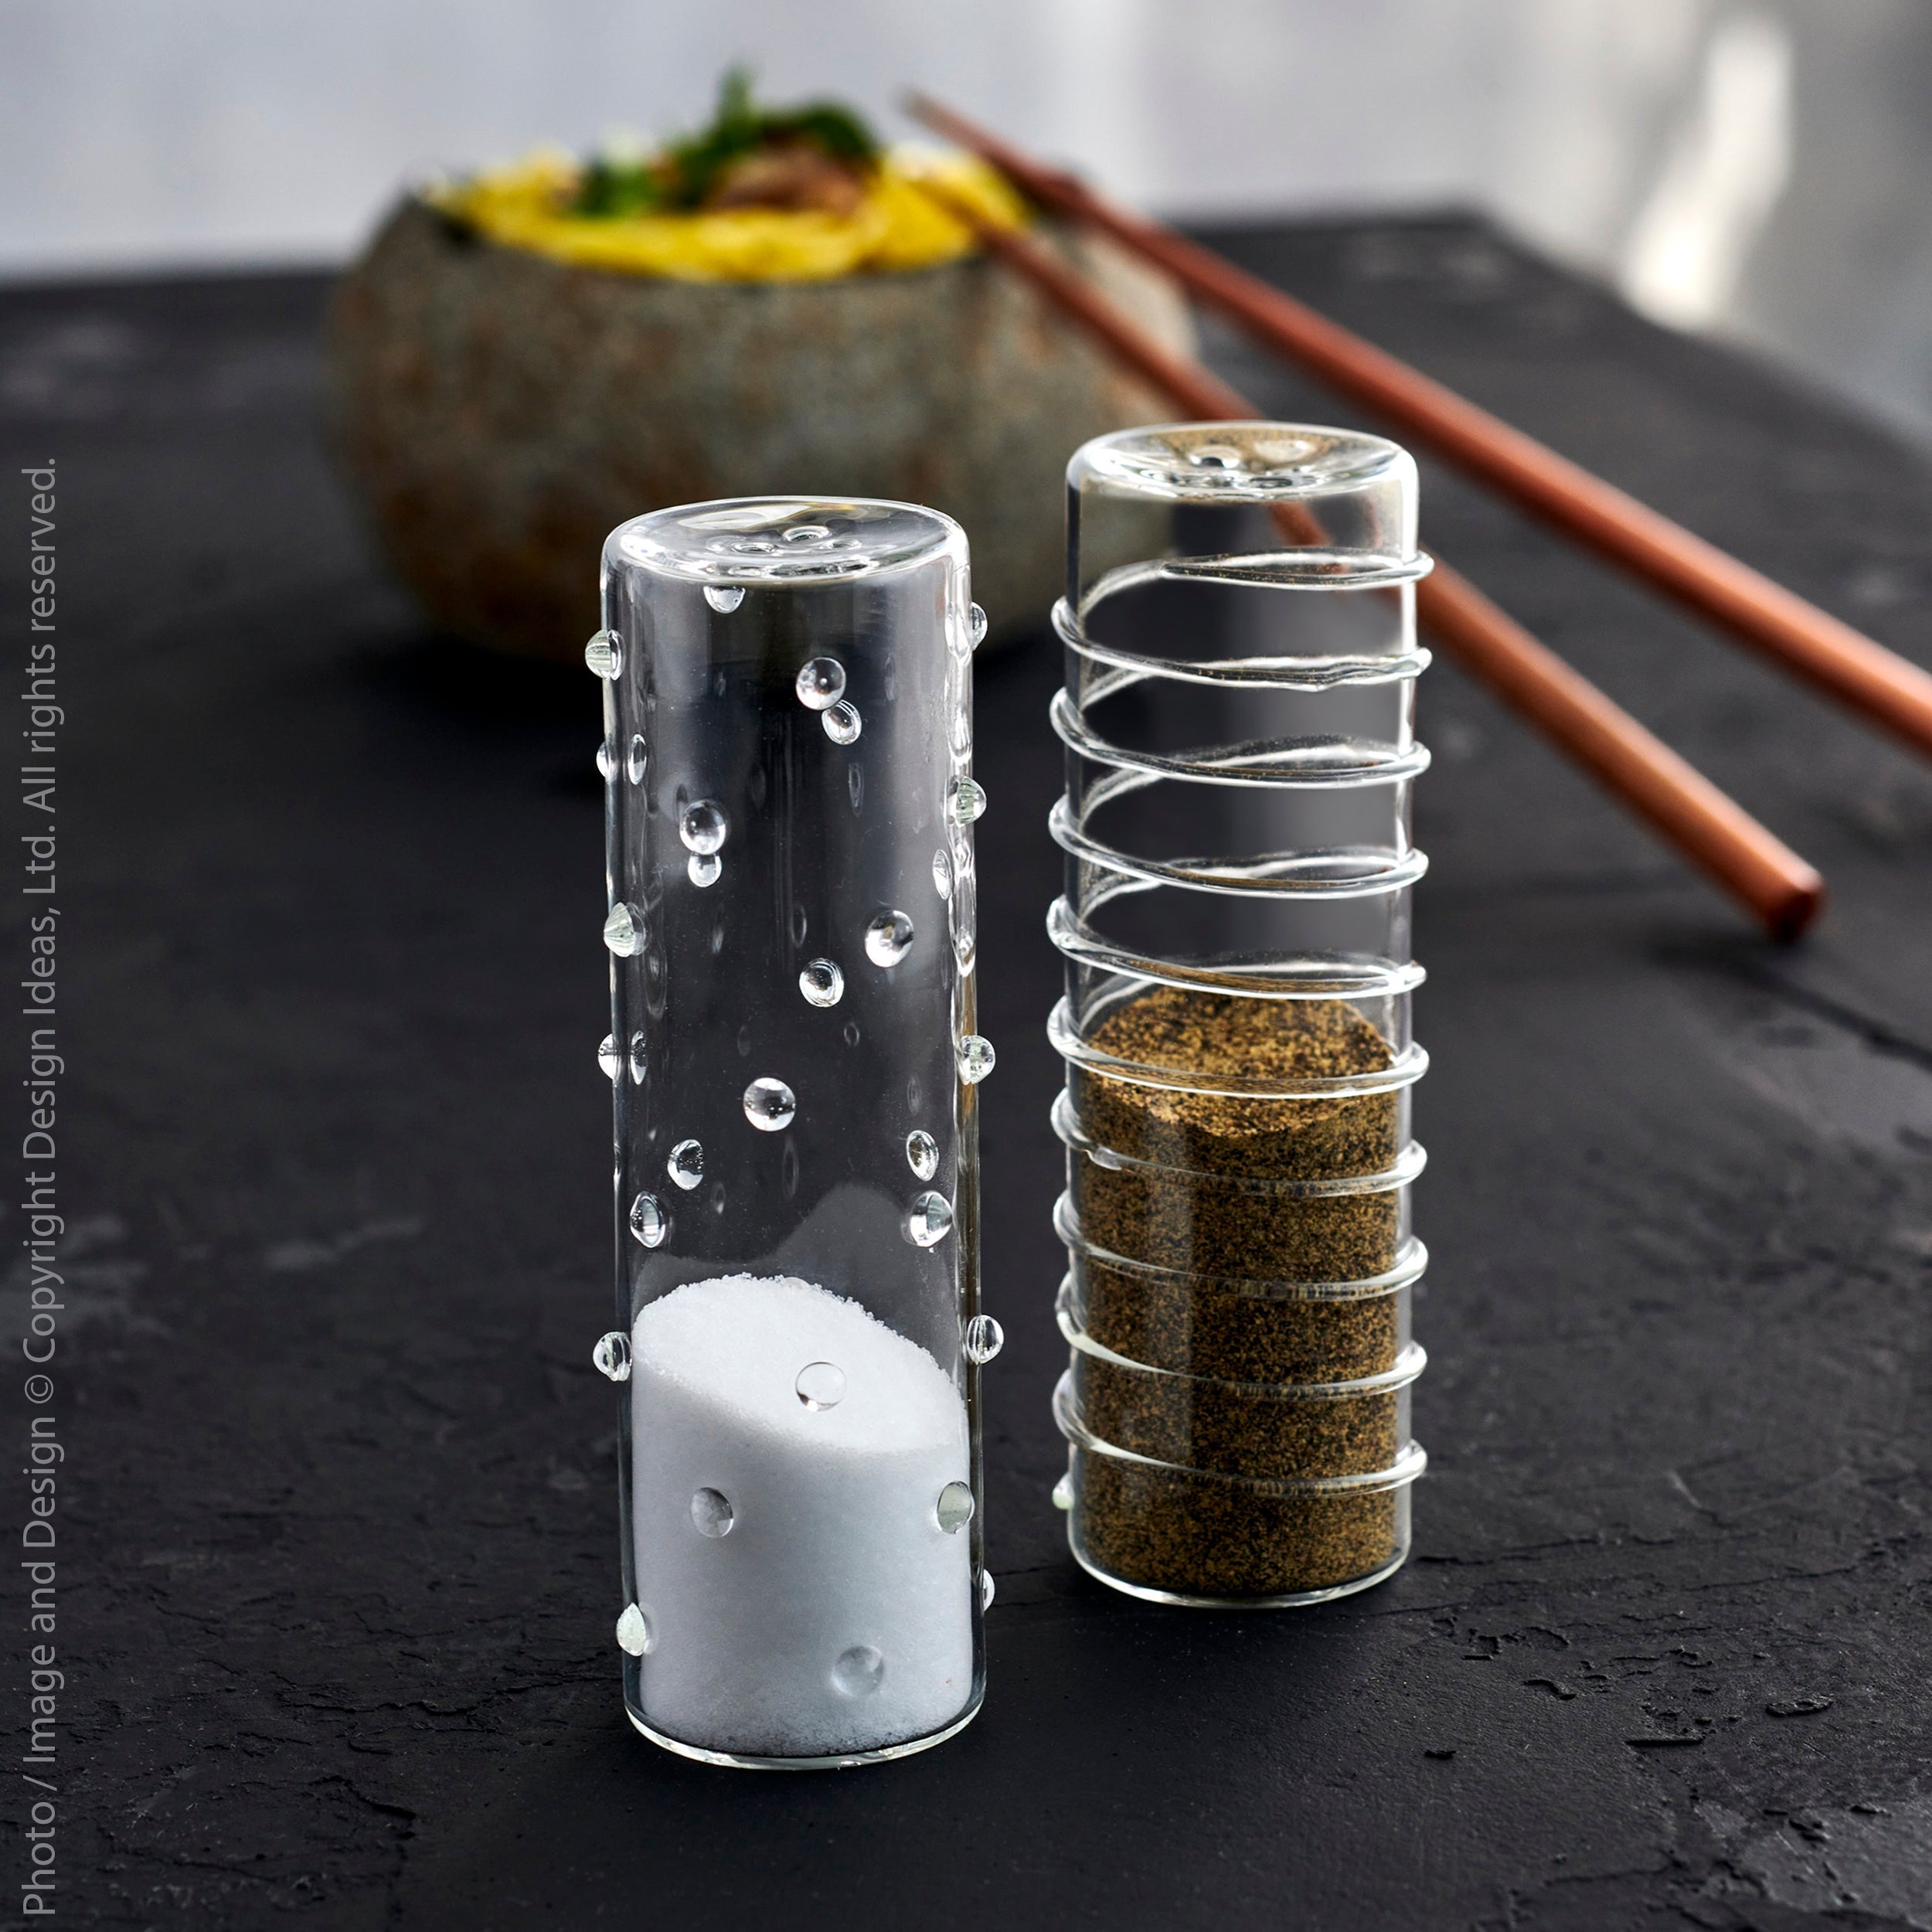 Livenza Borosilicate Glass Salt &amp; Pepper Shakers Black Color | Image 2 | From the Livenza Collection | Exquisitely made with natural borosilicate glass for long lasting use | Available in gray color | texxture home